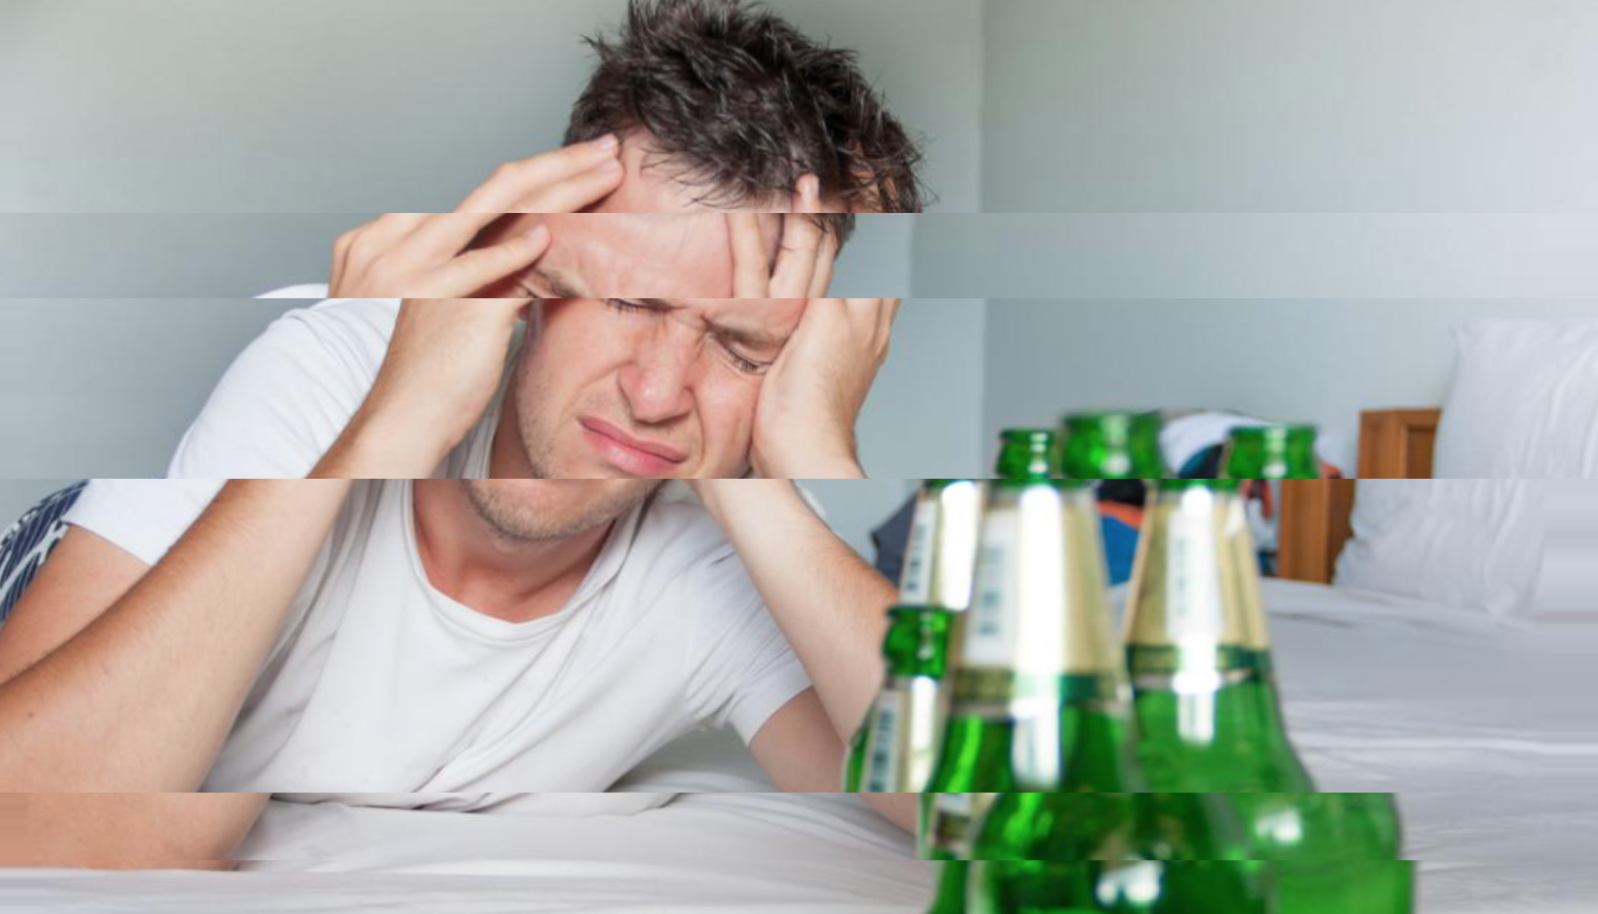 Potential Anti-Hangover Breakthrough As Pill Claimed To “Break Down” 70% of Alcohol In An Hour 